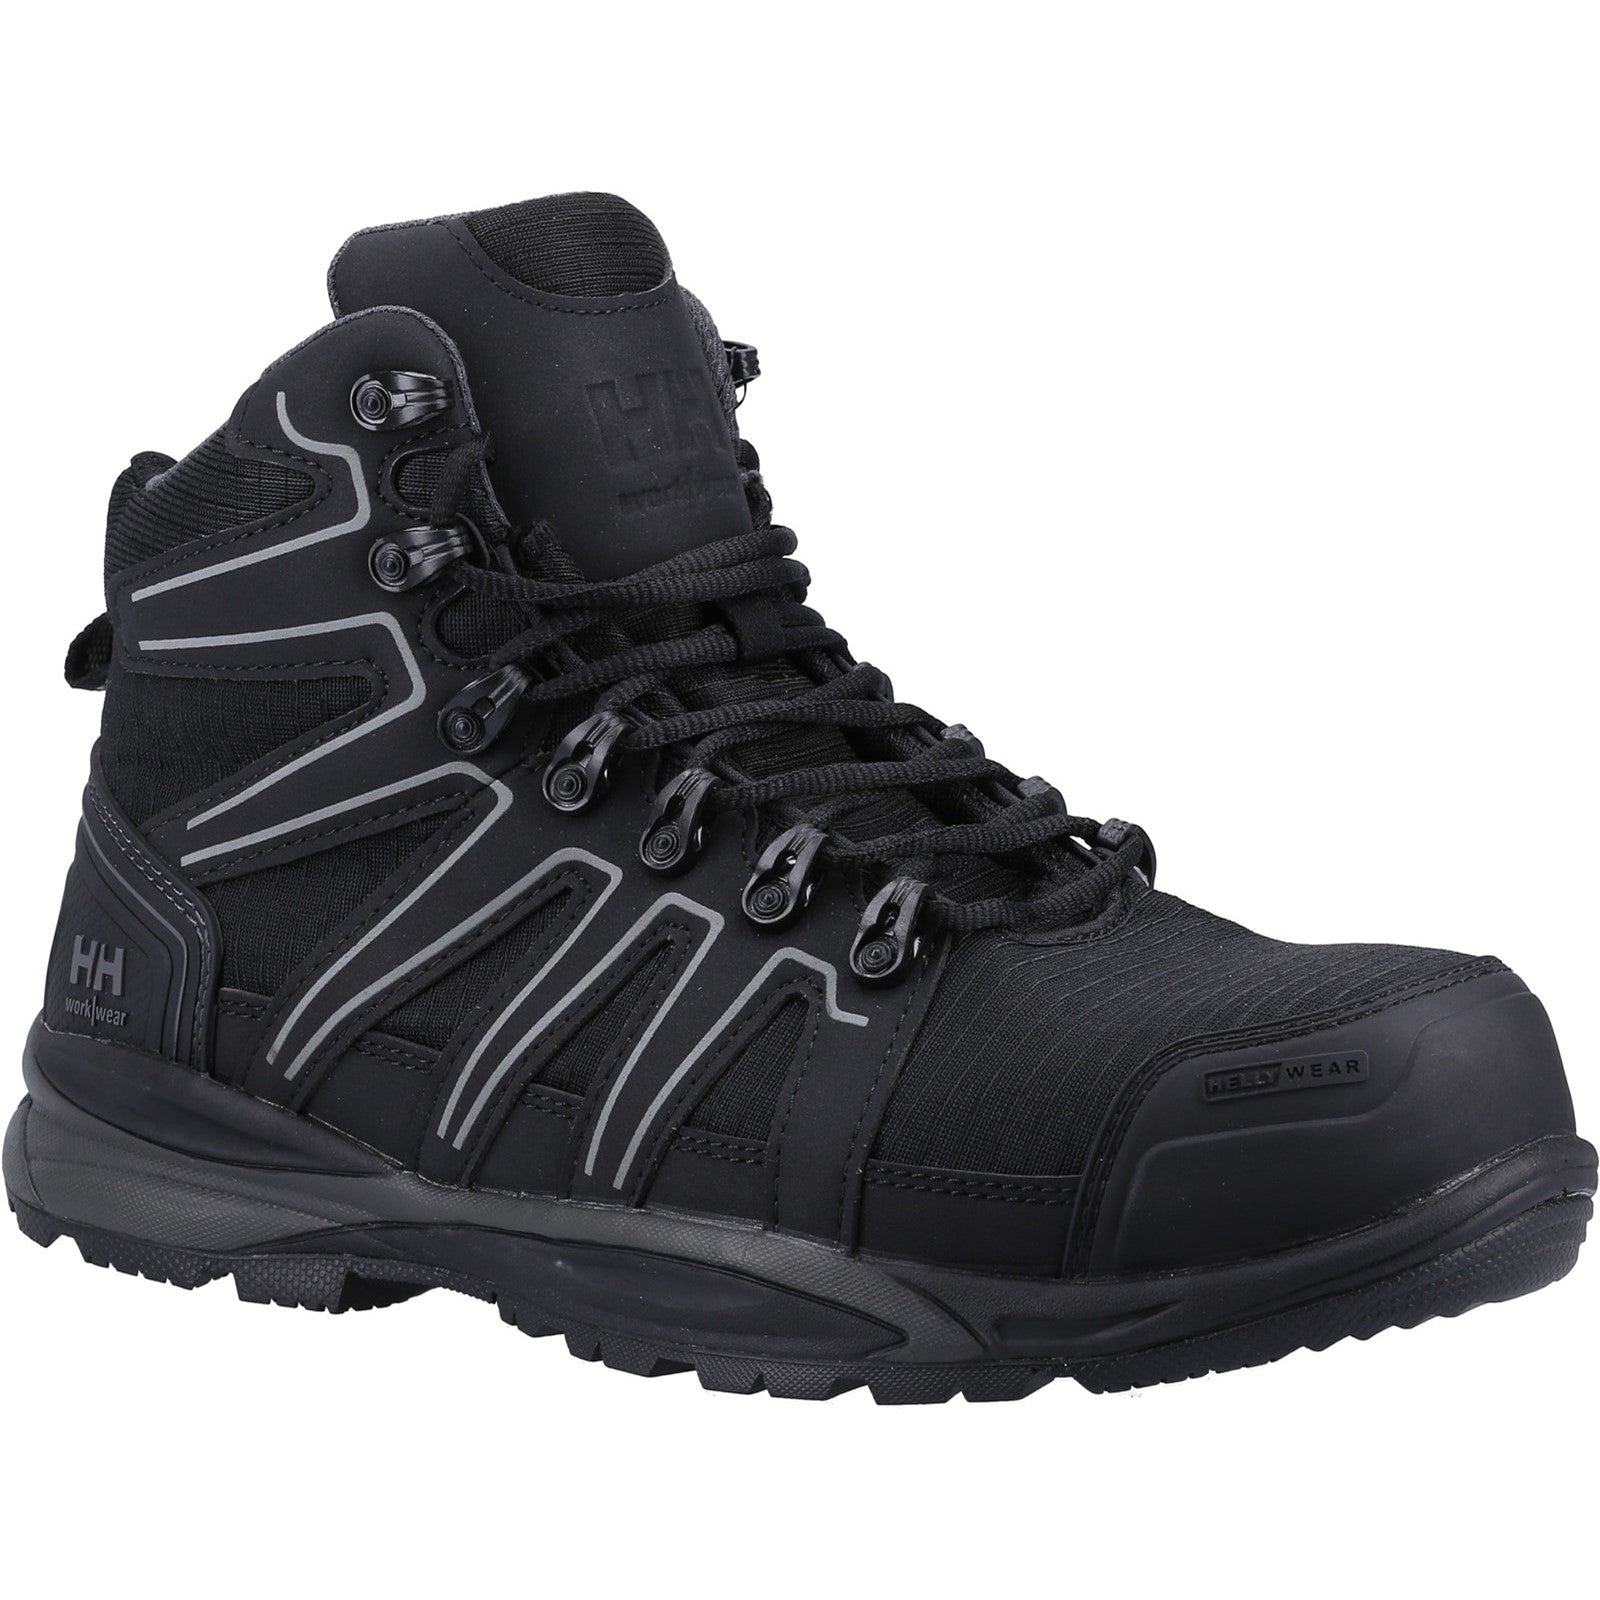 Manchester Mid S3 Safety Boot, Helly Hansen